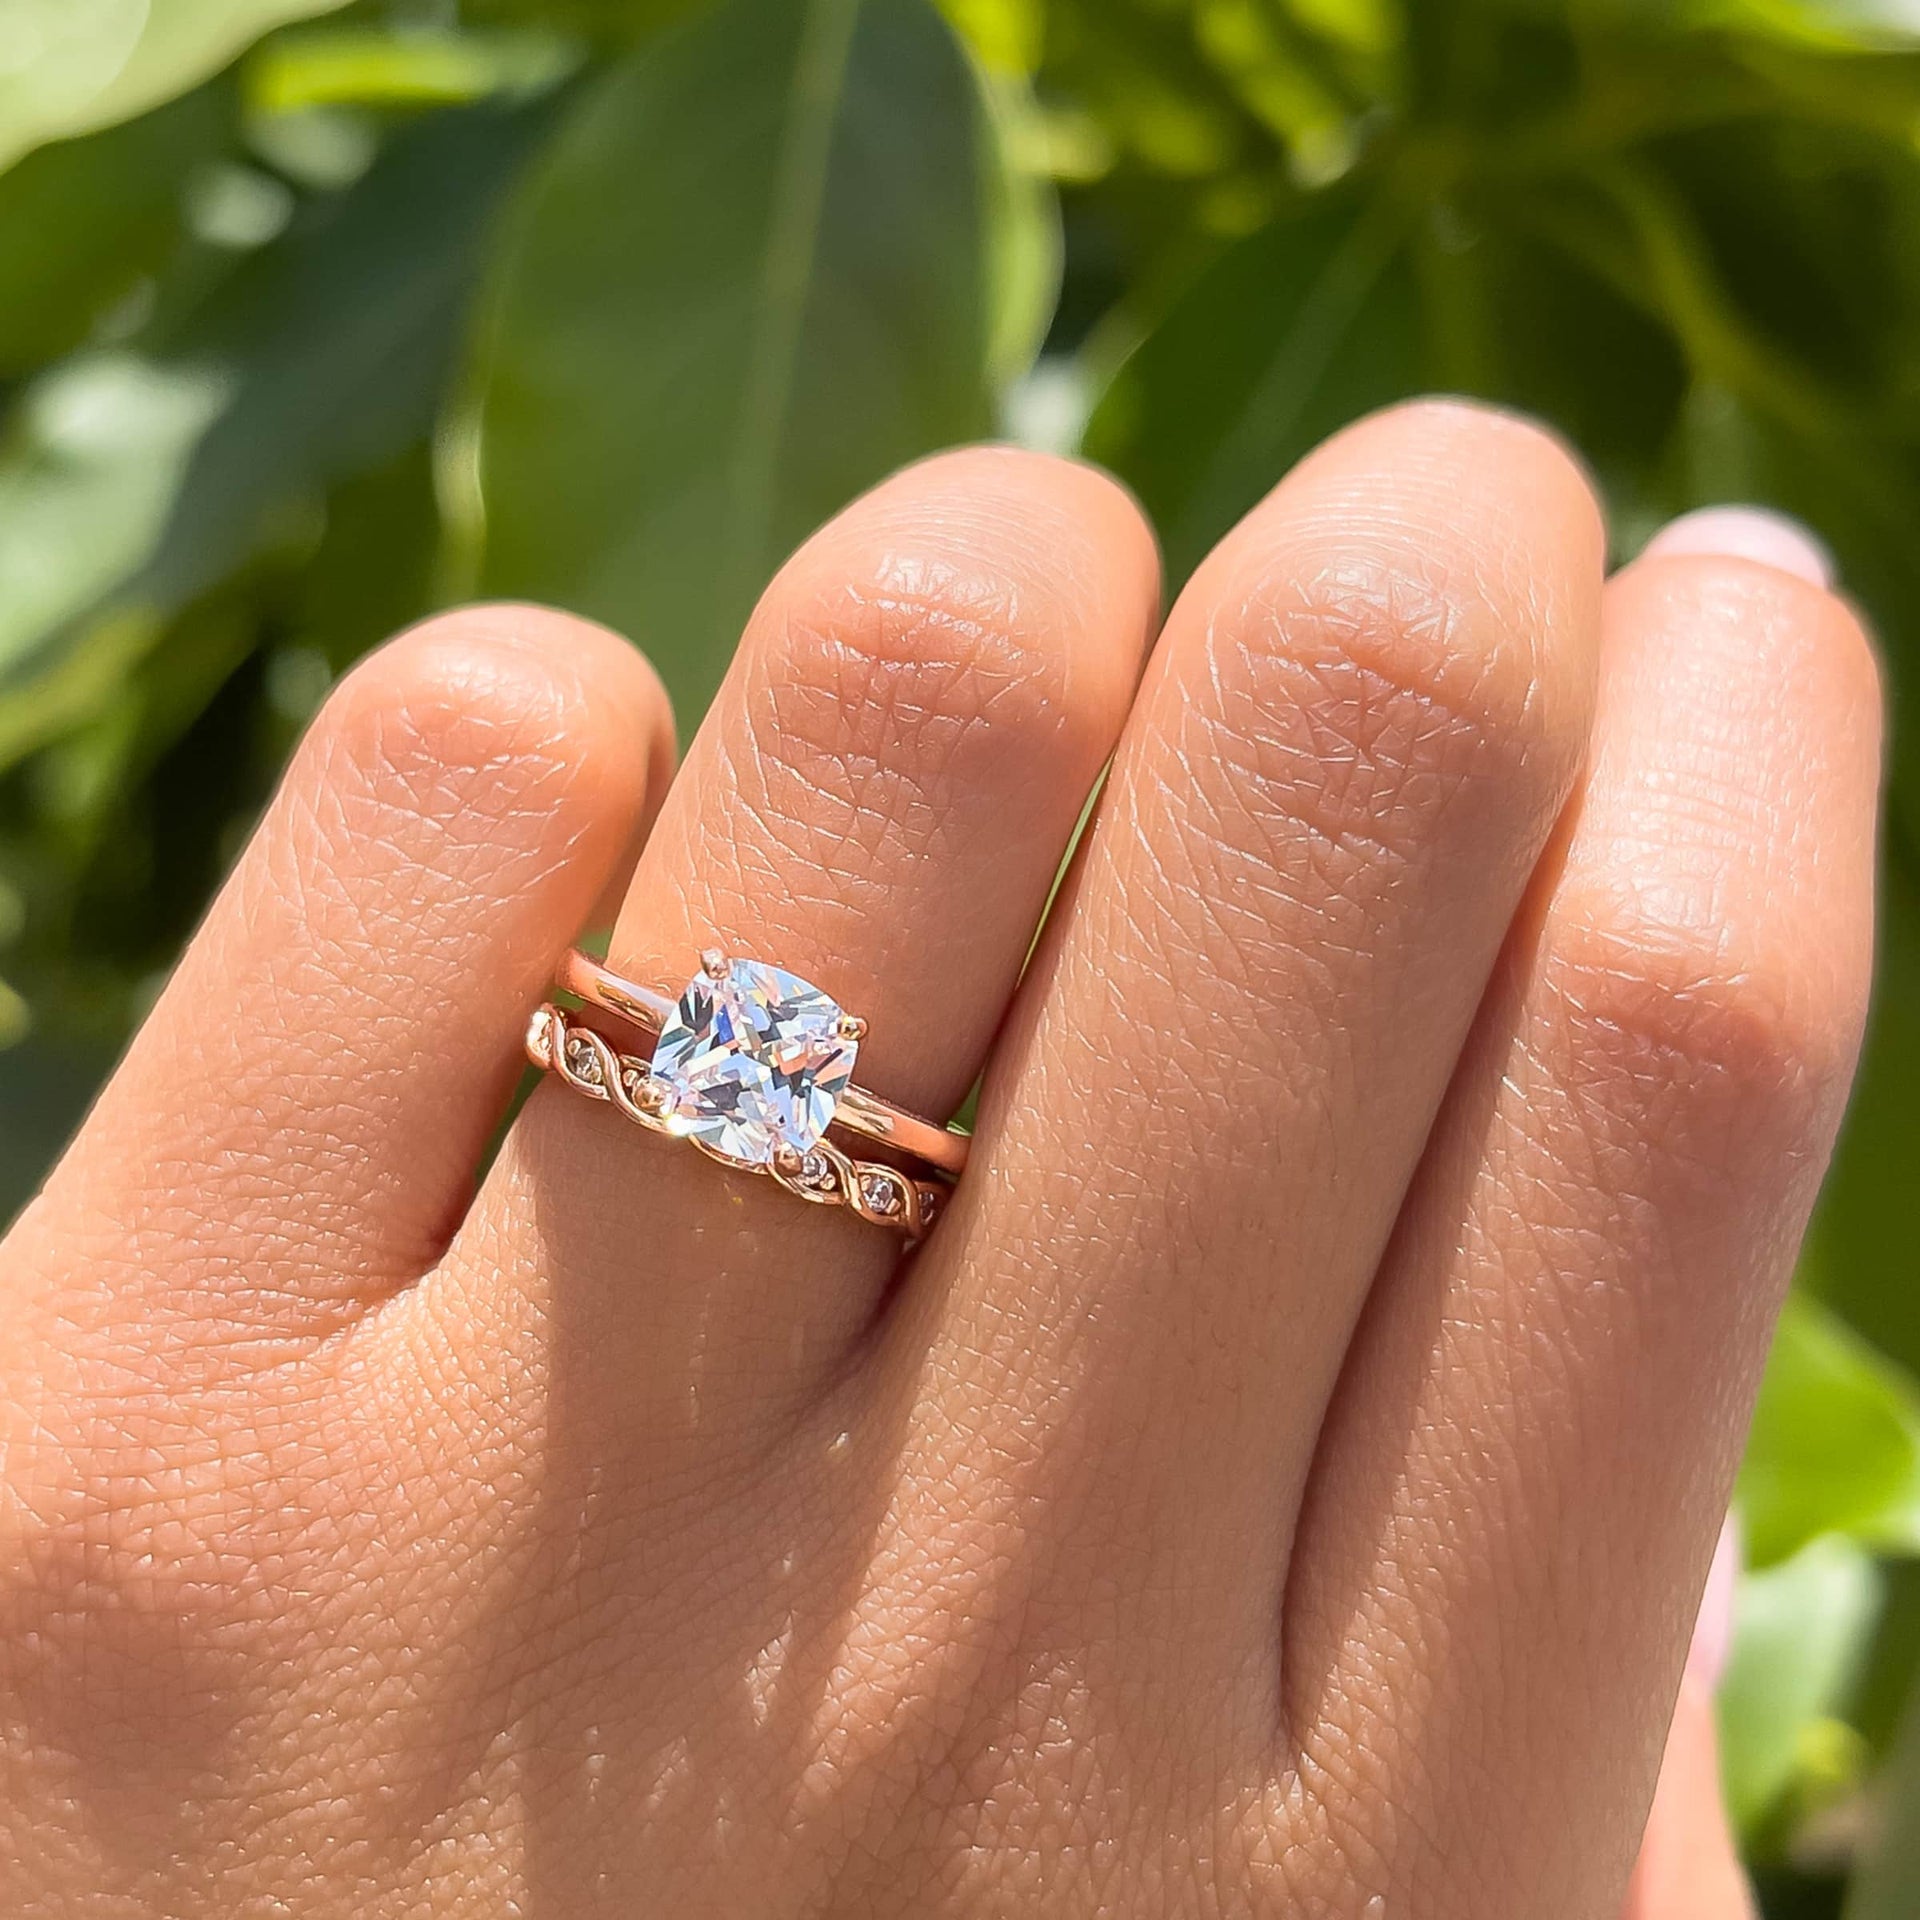 Rose gold 1 carat cushion cut solitaire engagement ring on female hand in front of greenery